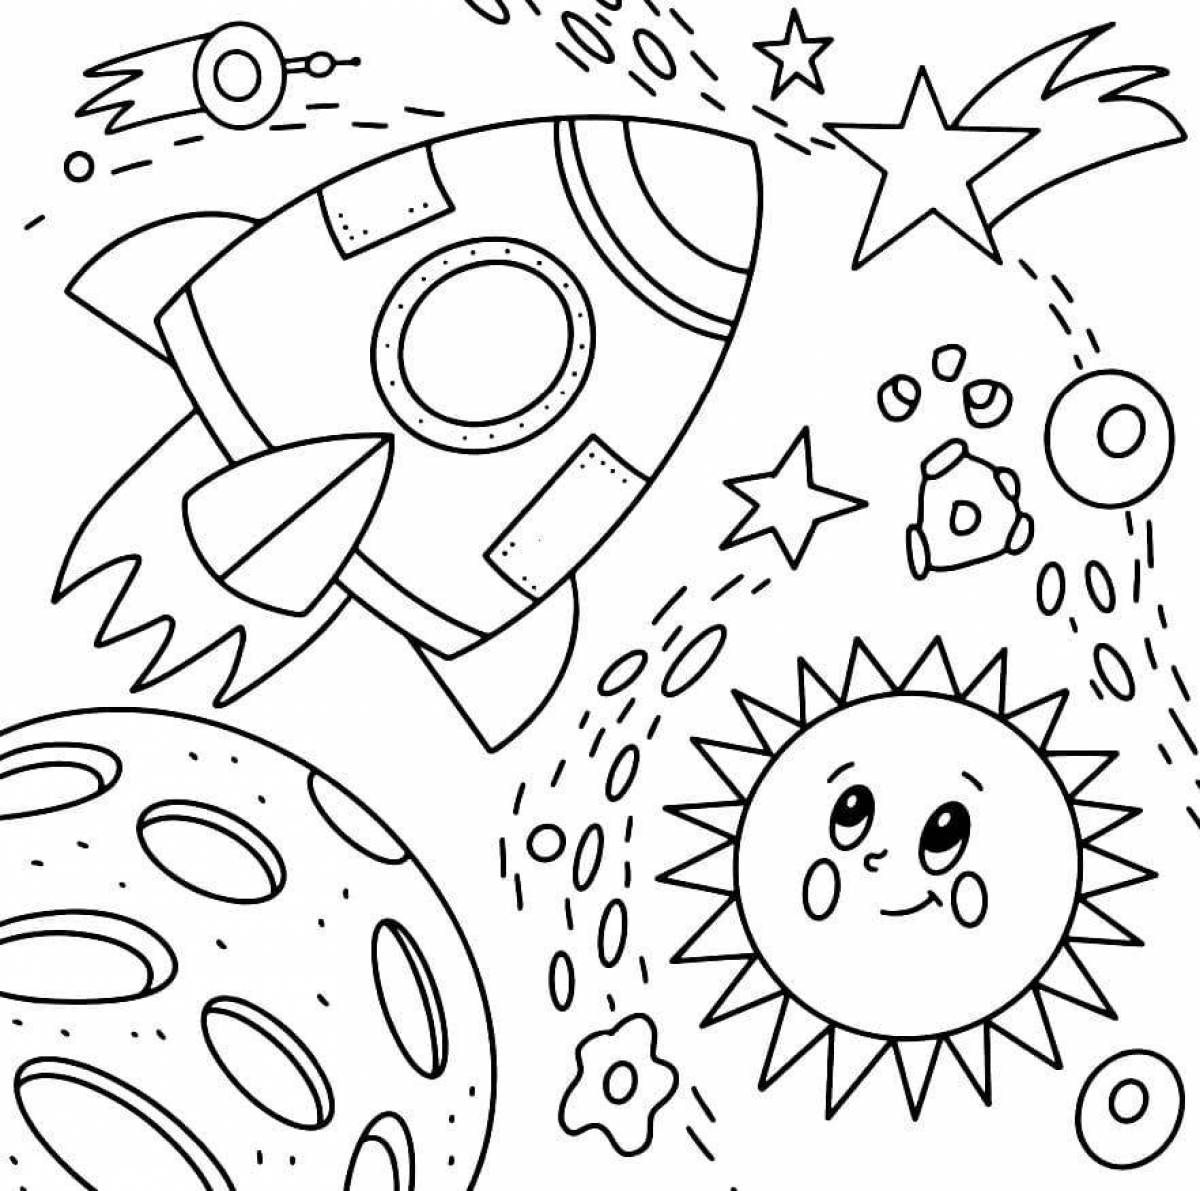 Exquisite space coloring book